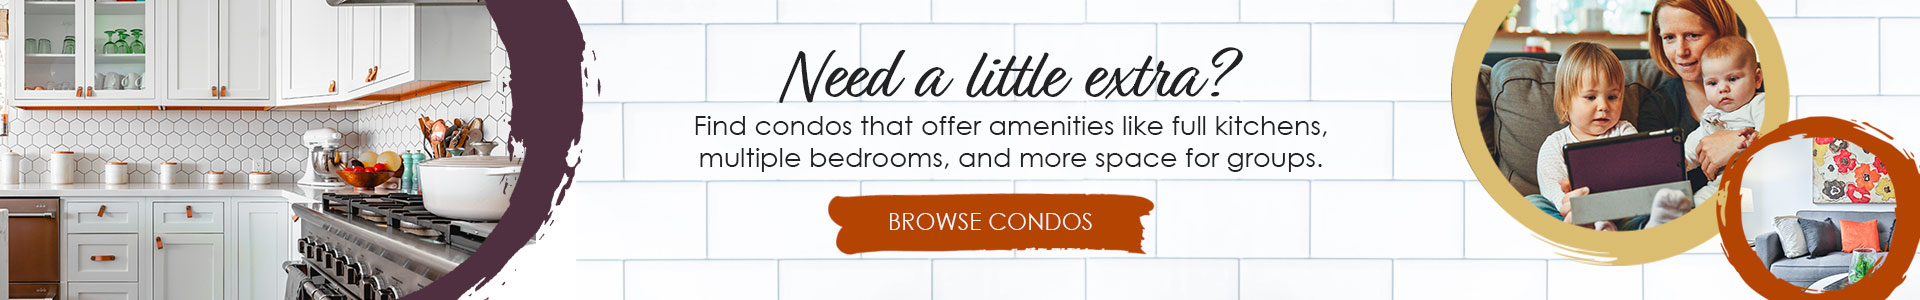 Need a little extra? Click to browse condos that offer amenities like full kitchens, multiple bedrooms, & more space for groups.